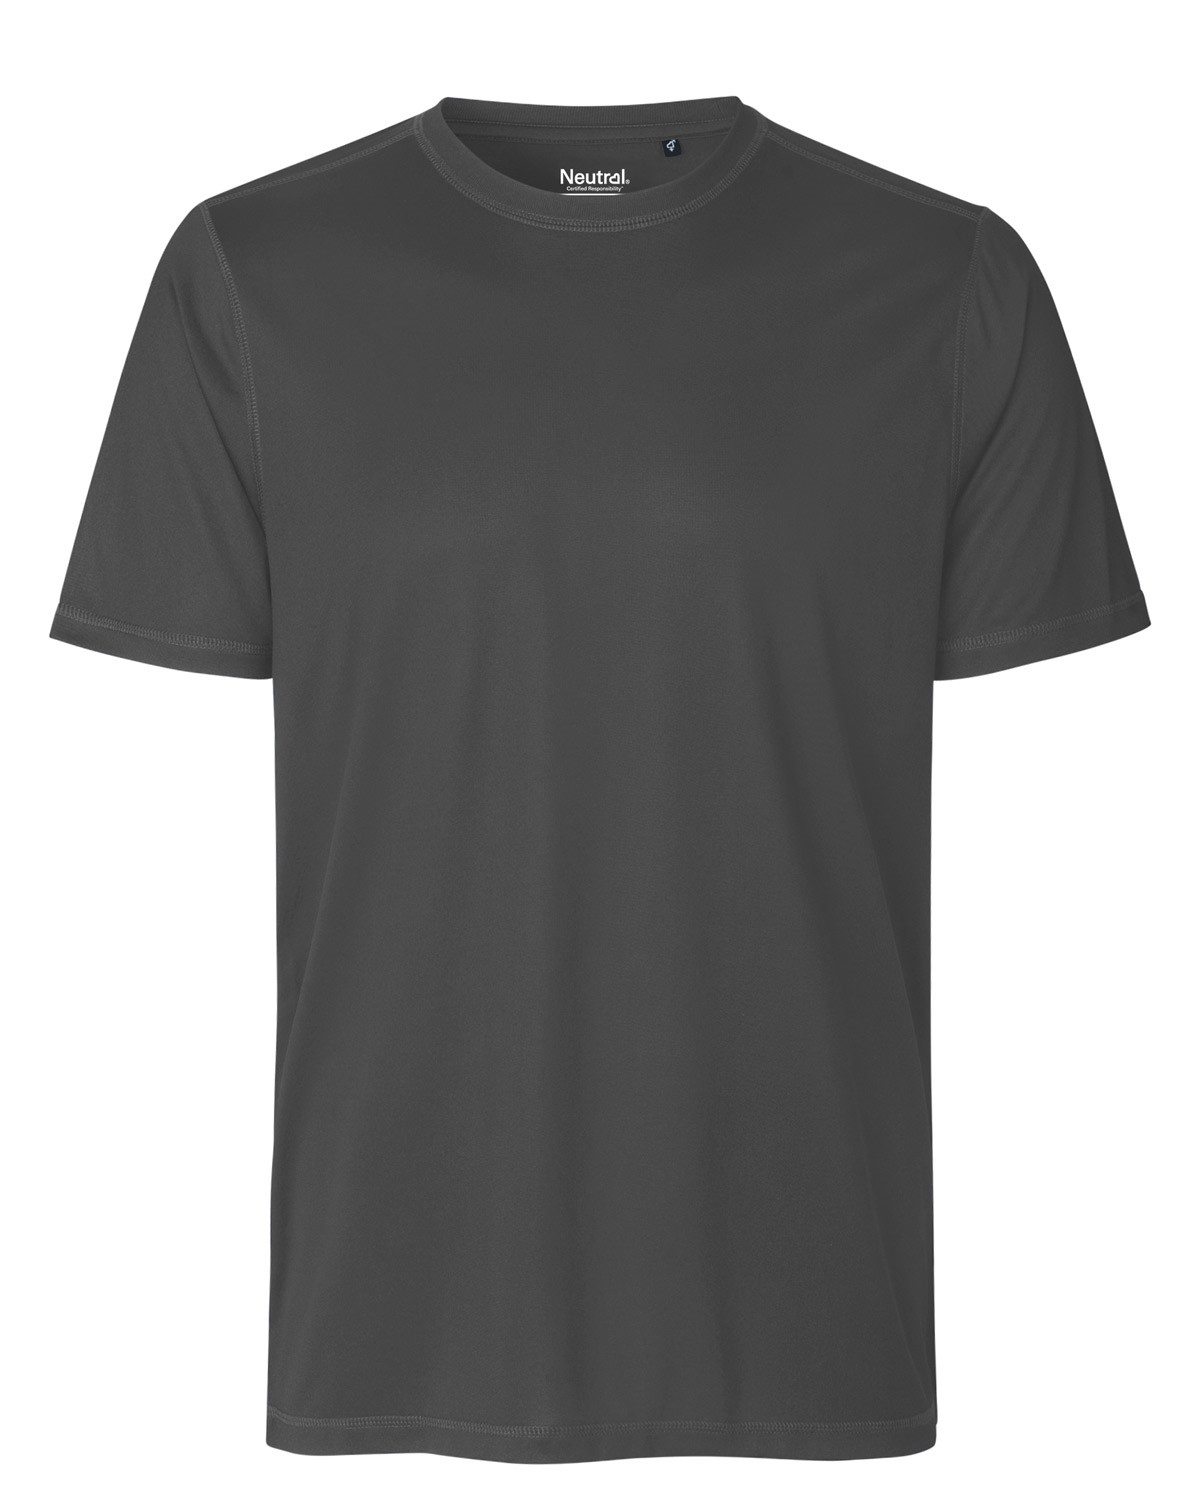 Billede af Neutral Organic - Recycled Performance T-shirt (Charcoal, M)